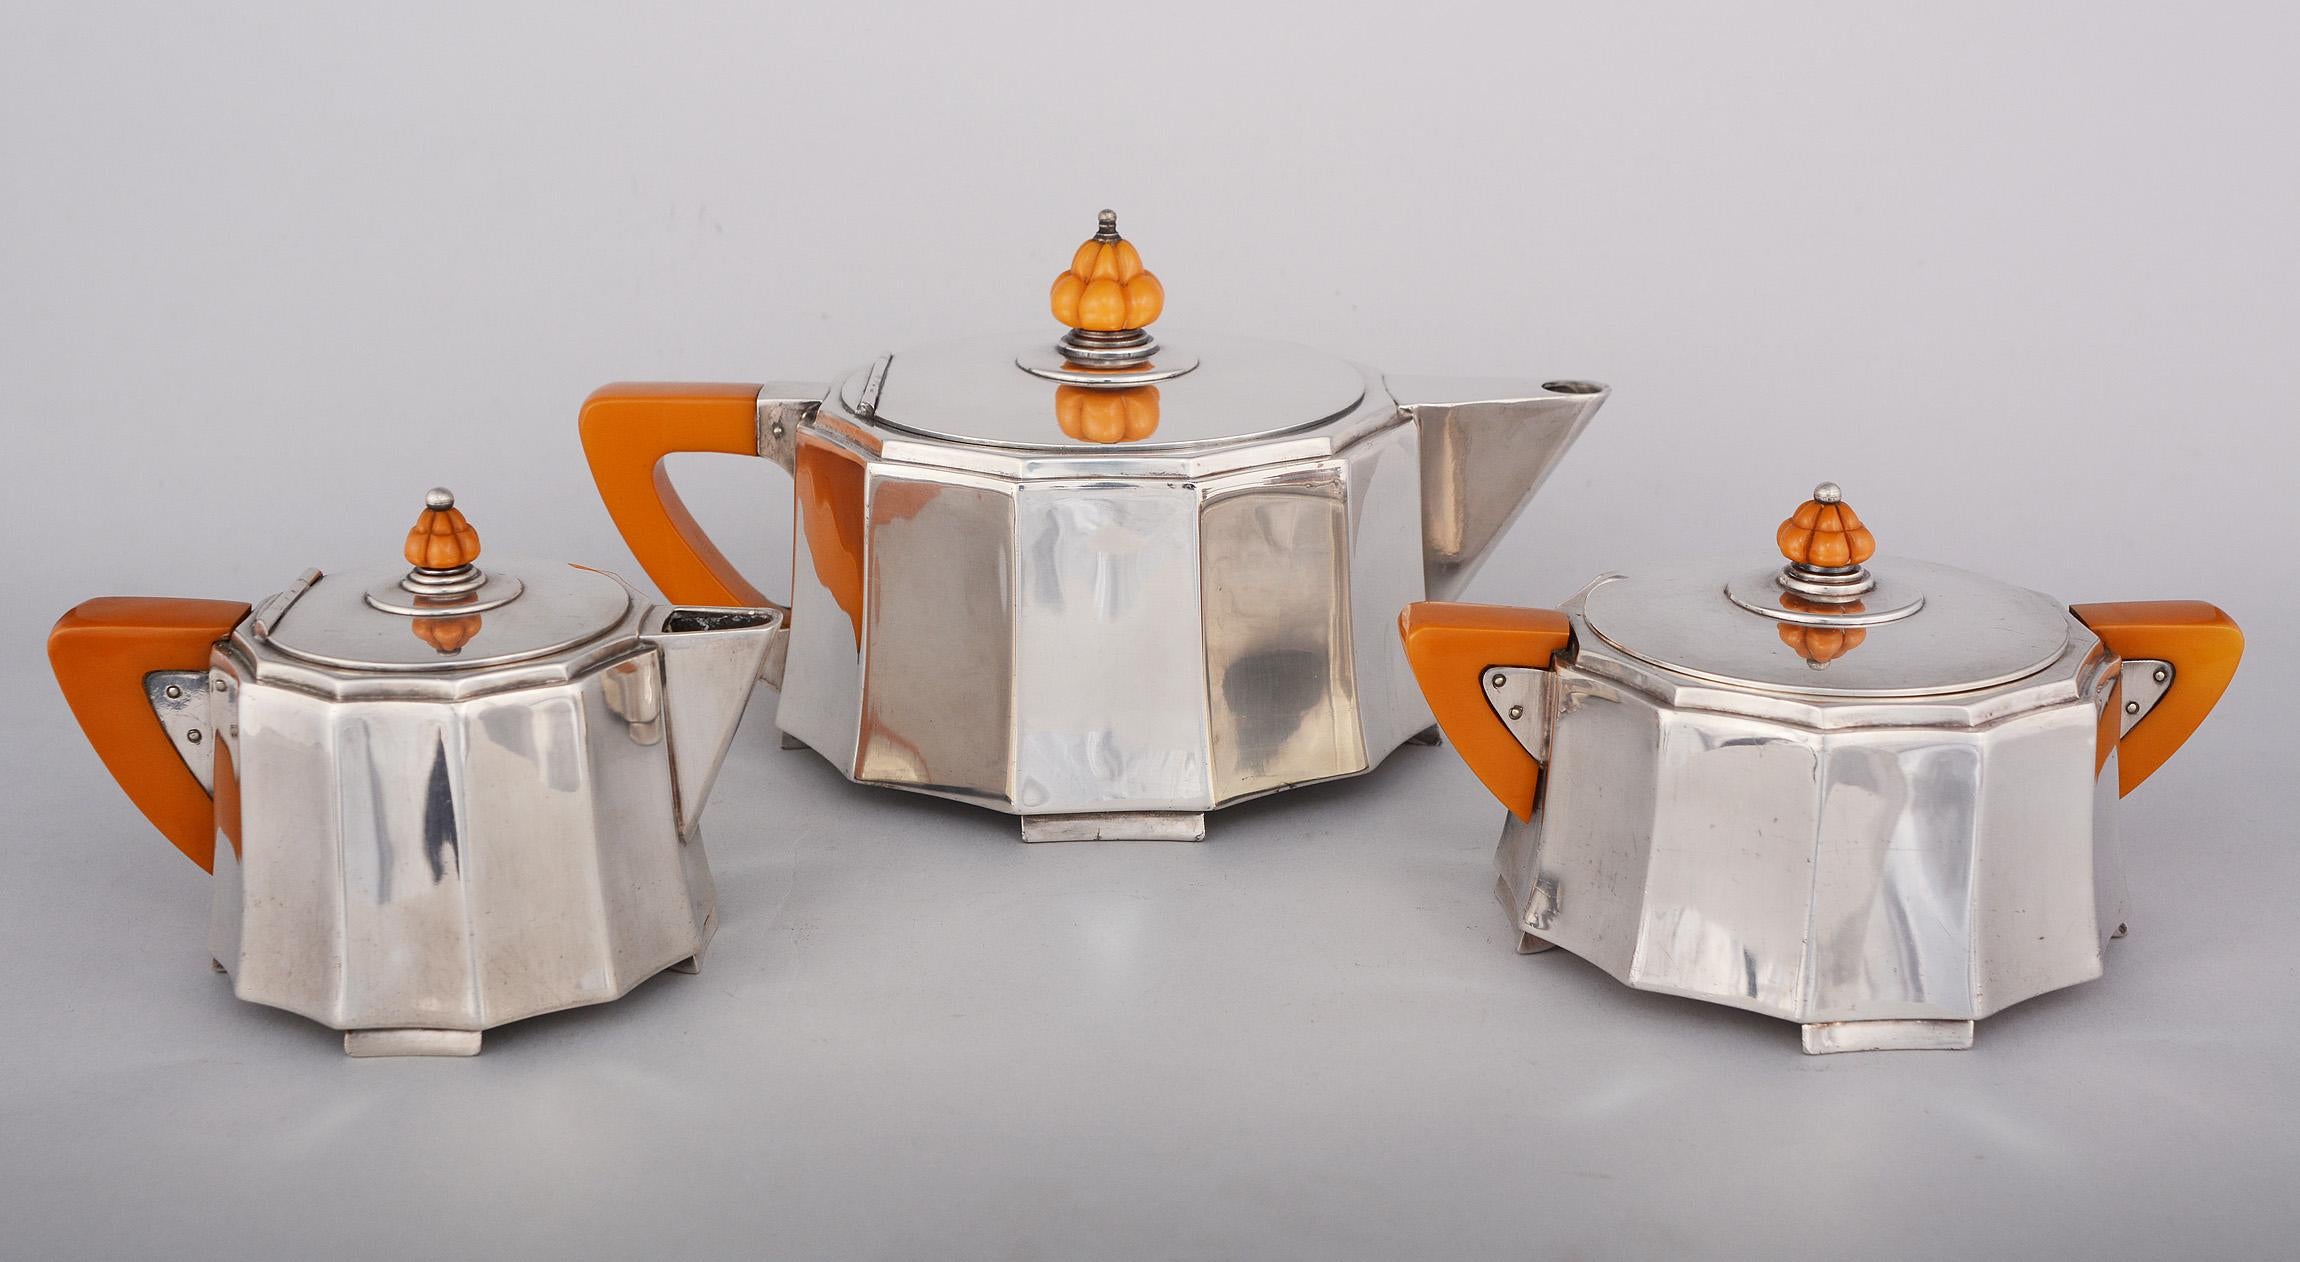 Silver plate and bakelite Art Deco tea set by Meriden. This set has dramatic fluted sides with angular handles and spouts. The set consists of a teapot, creamer and sugar. The set shows normal wear with light scratches and marks.